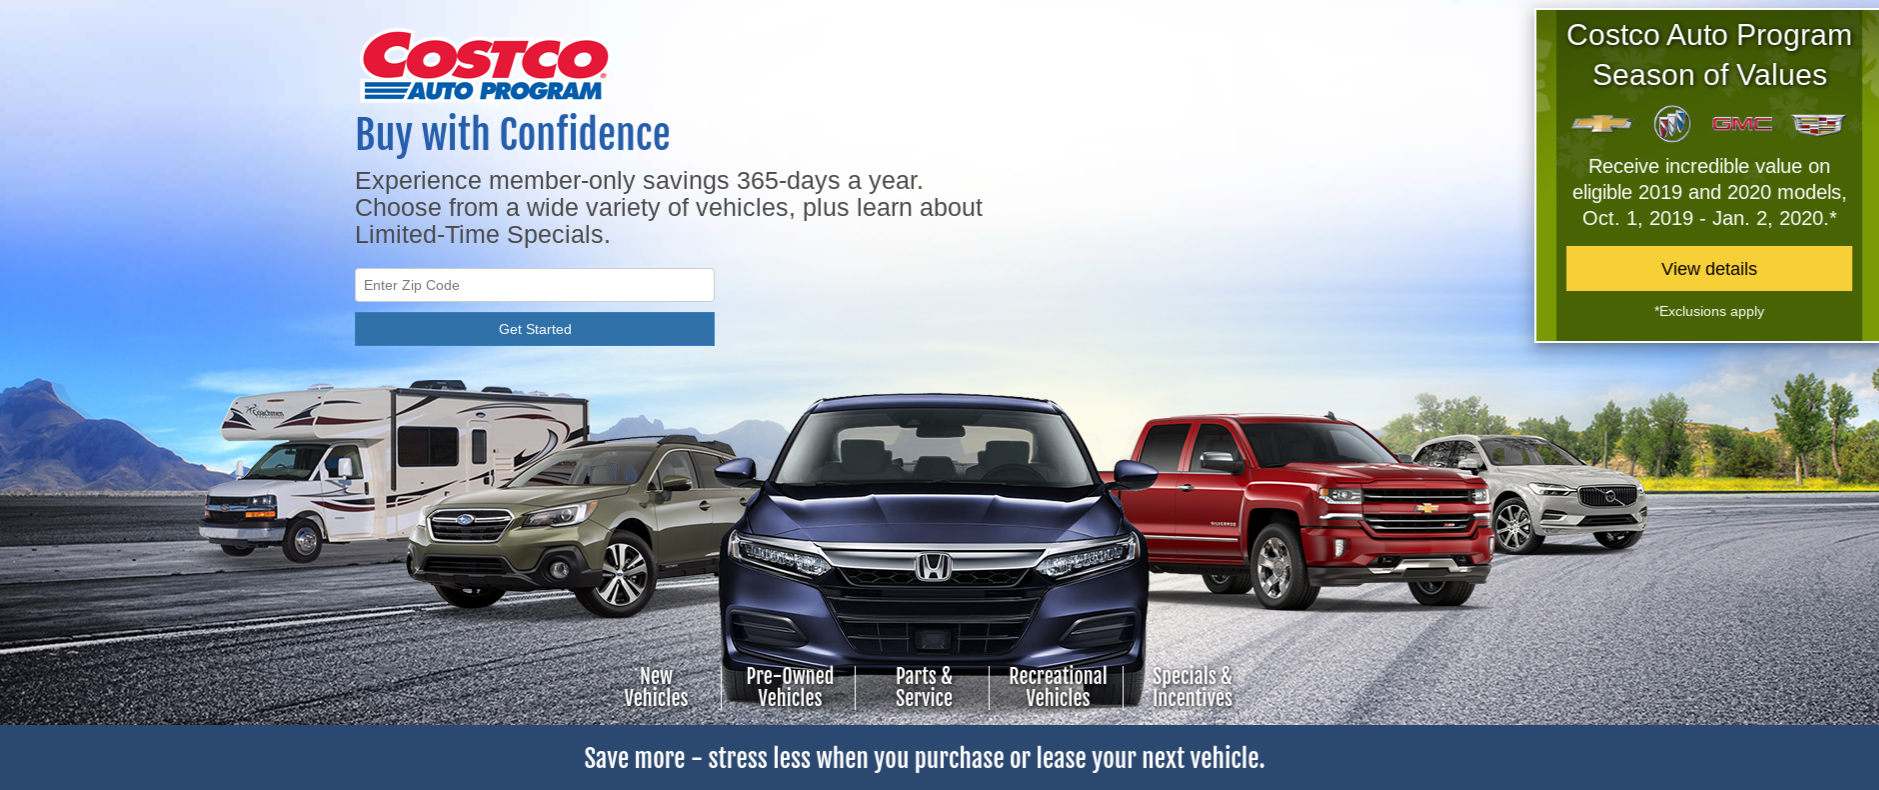 Costco Kicks Off Season of Values With Great GM Vehicle Deals The